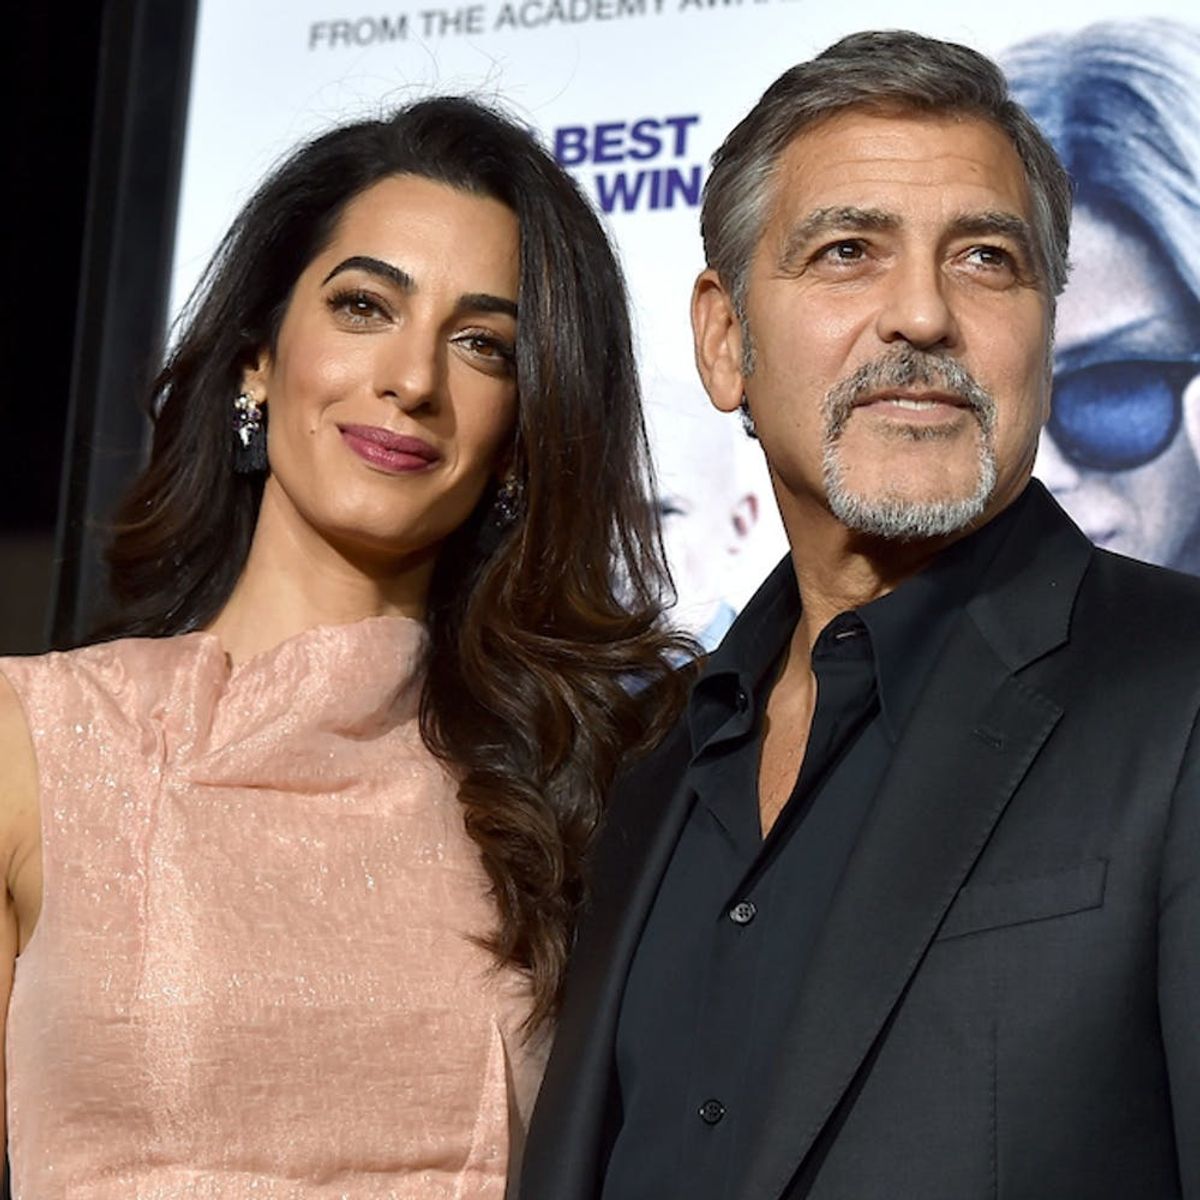 Amal Clooney Is Using Her Celebrity to Highlight Human Rights